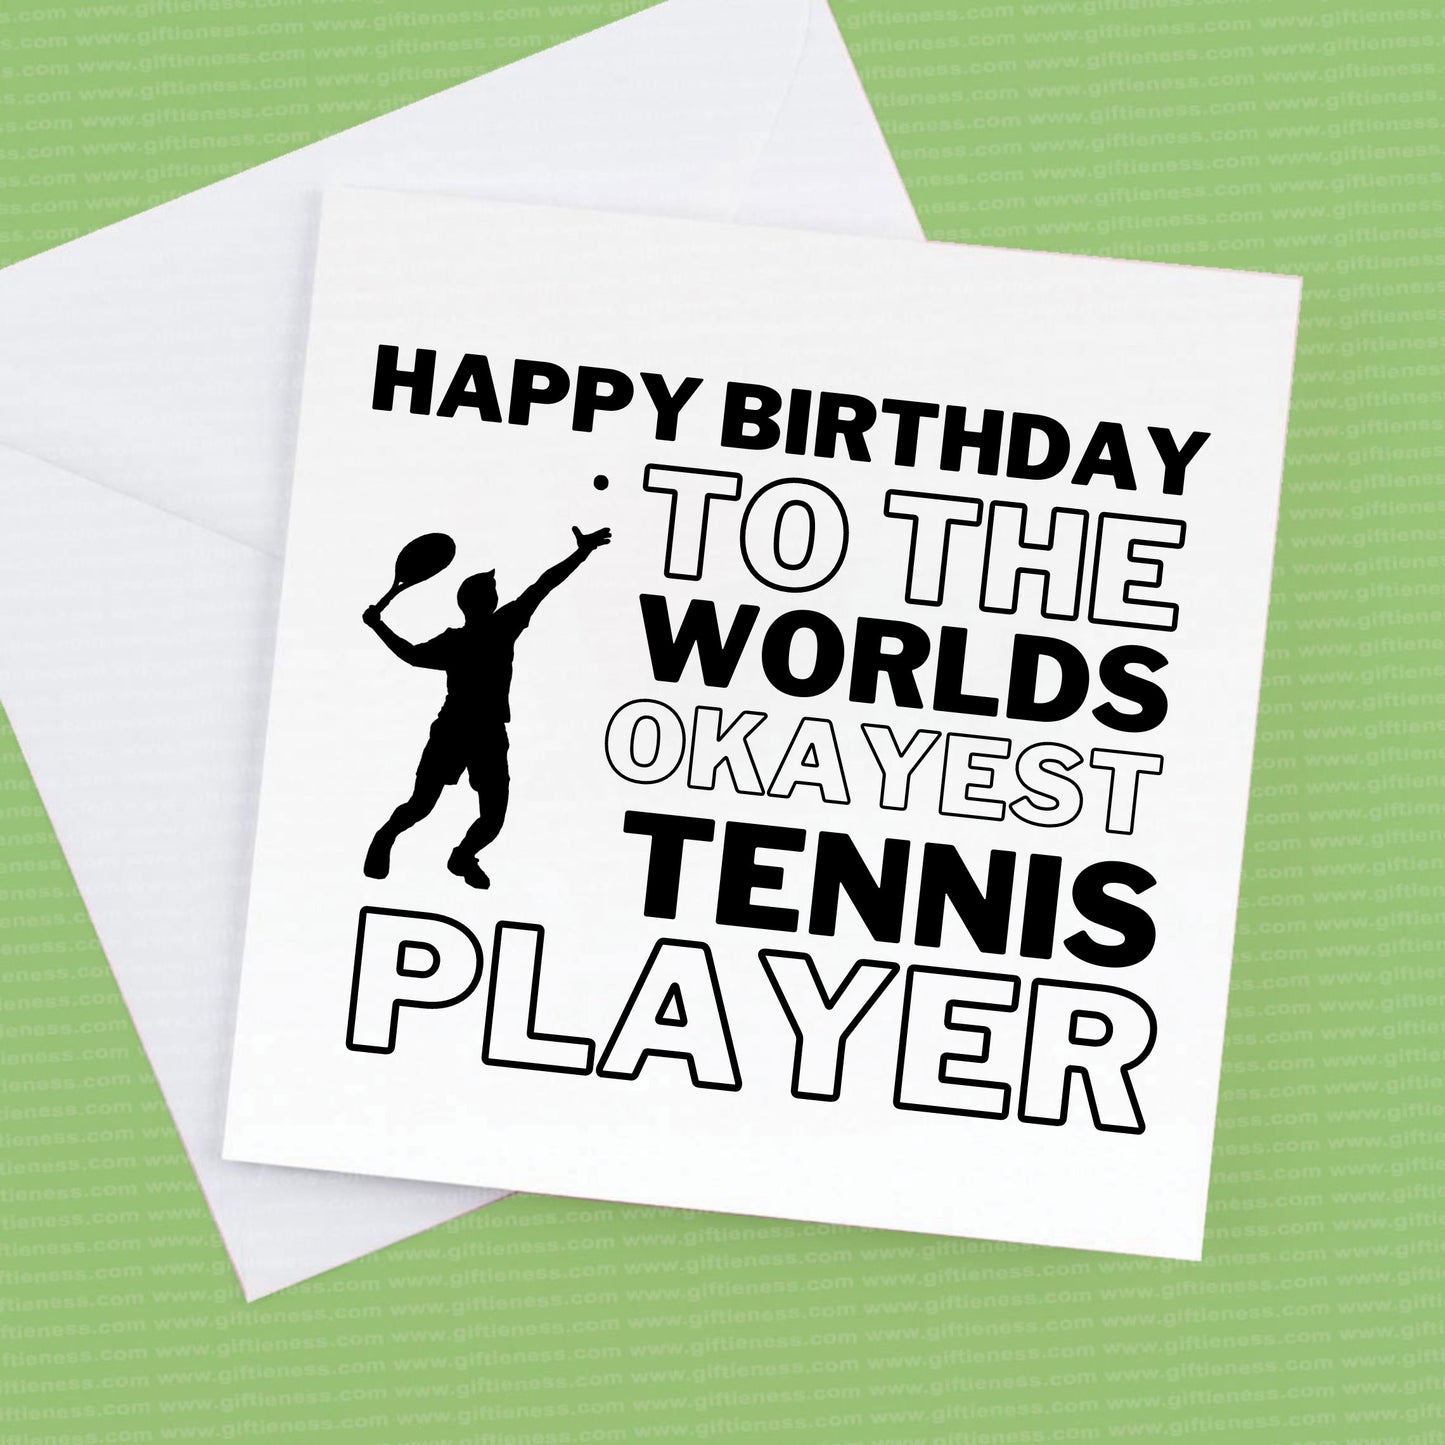 Happy Birthday Card for the Tennis Player, worlds okayest Tennis player